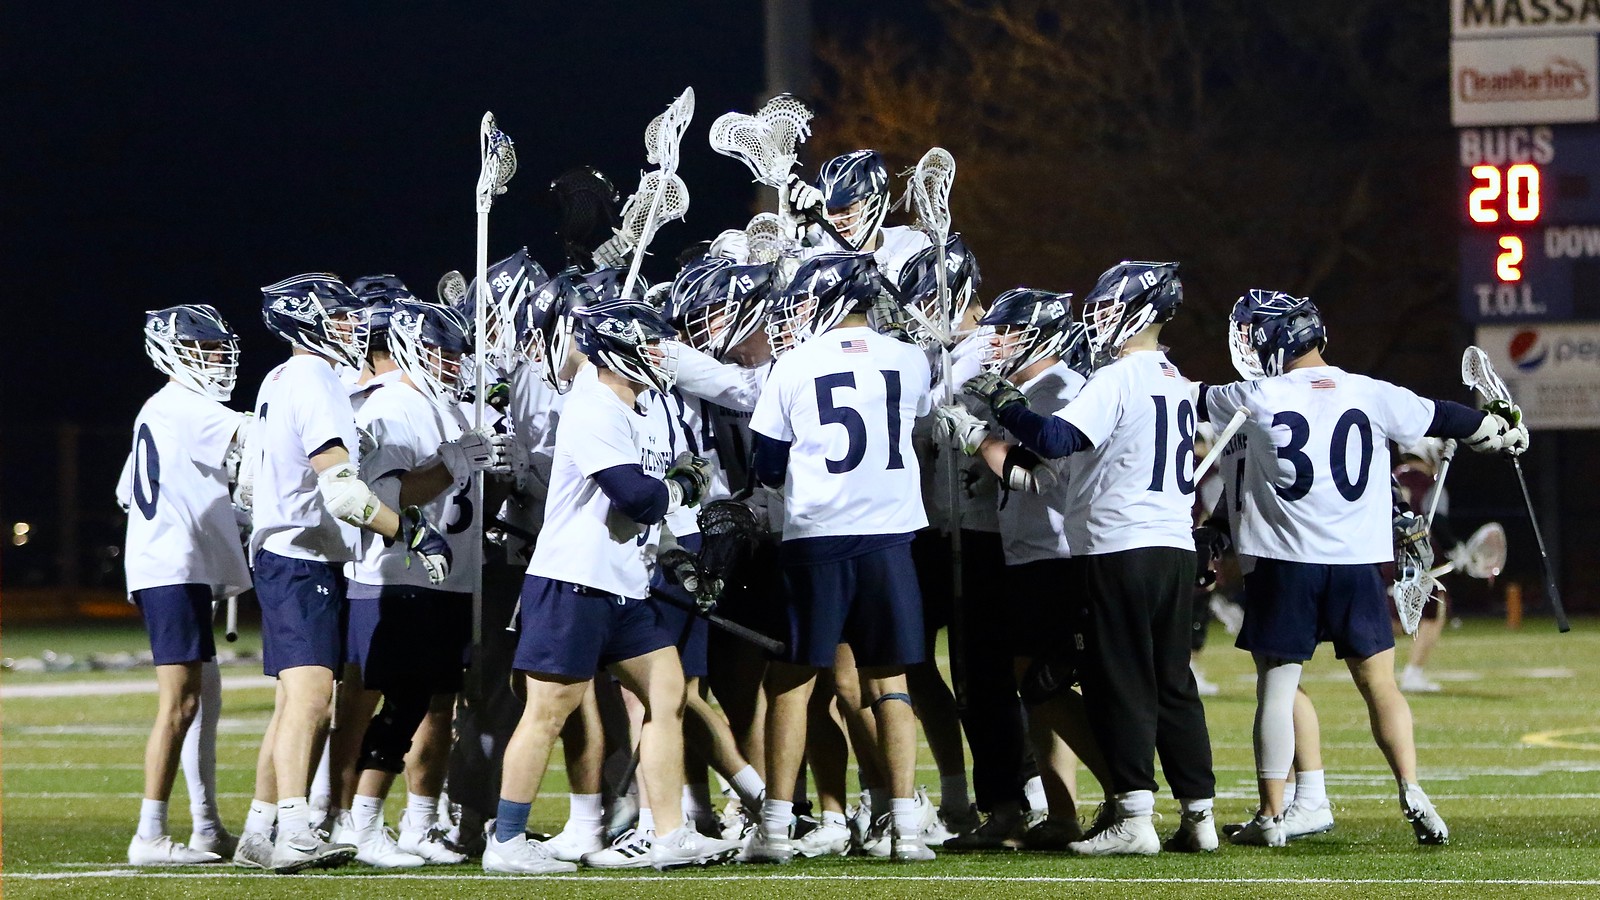 Men's Lax Captures Norwich's Flag on Wednesday in Buzzards Bay